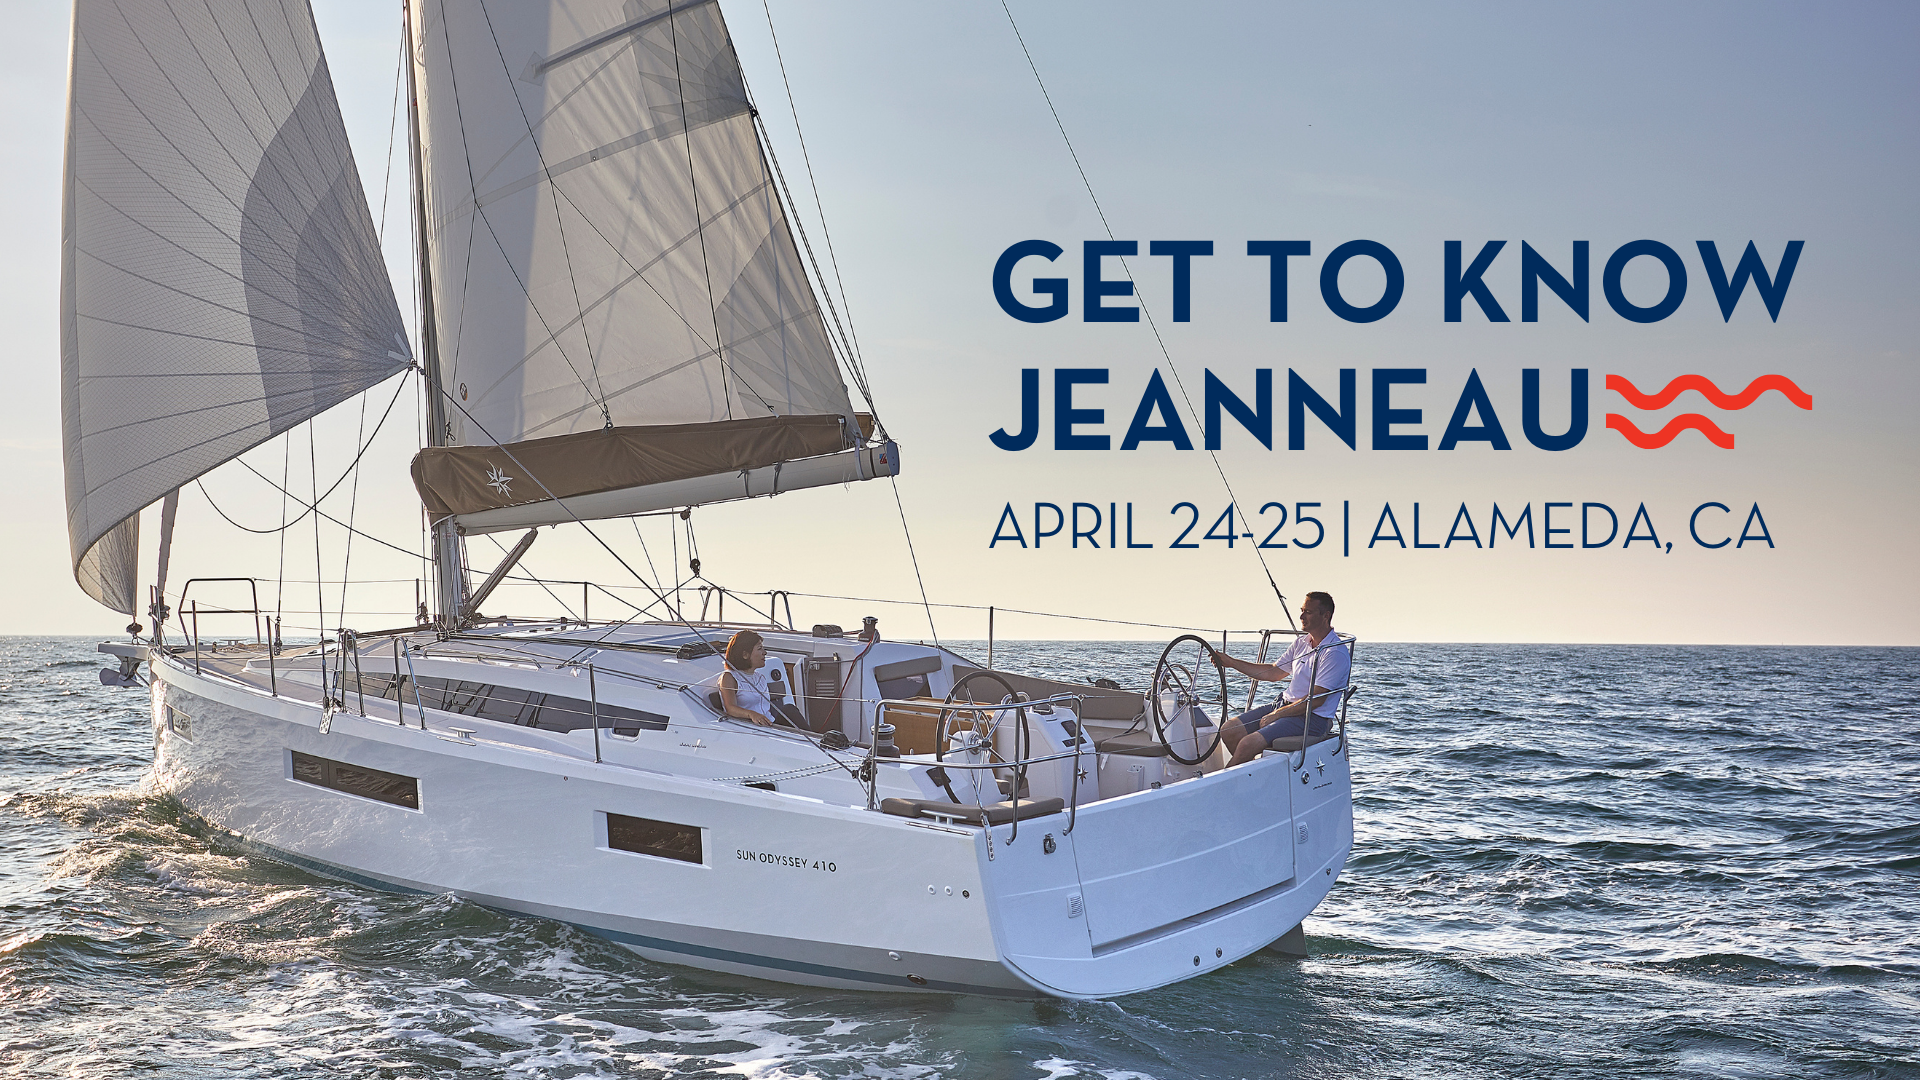 Event dates and location for Get to Know Jeanneau April 24 and 25 in Alameda, CA